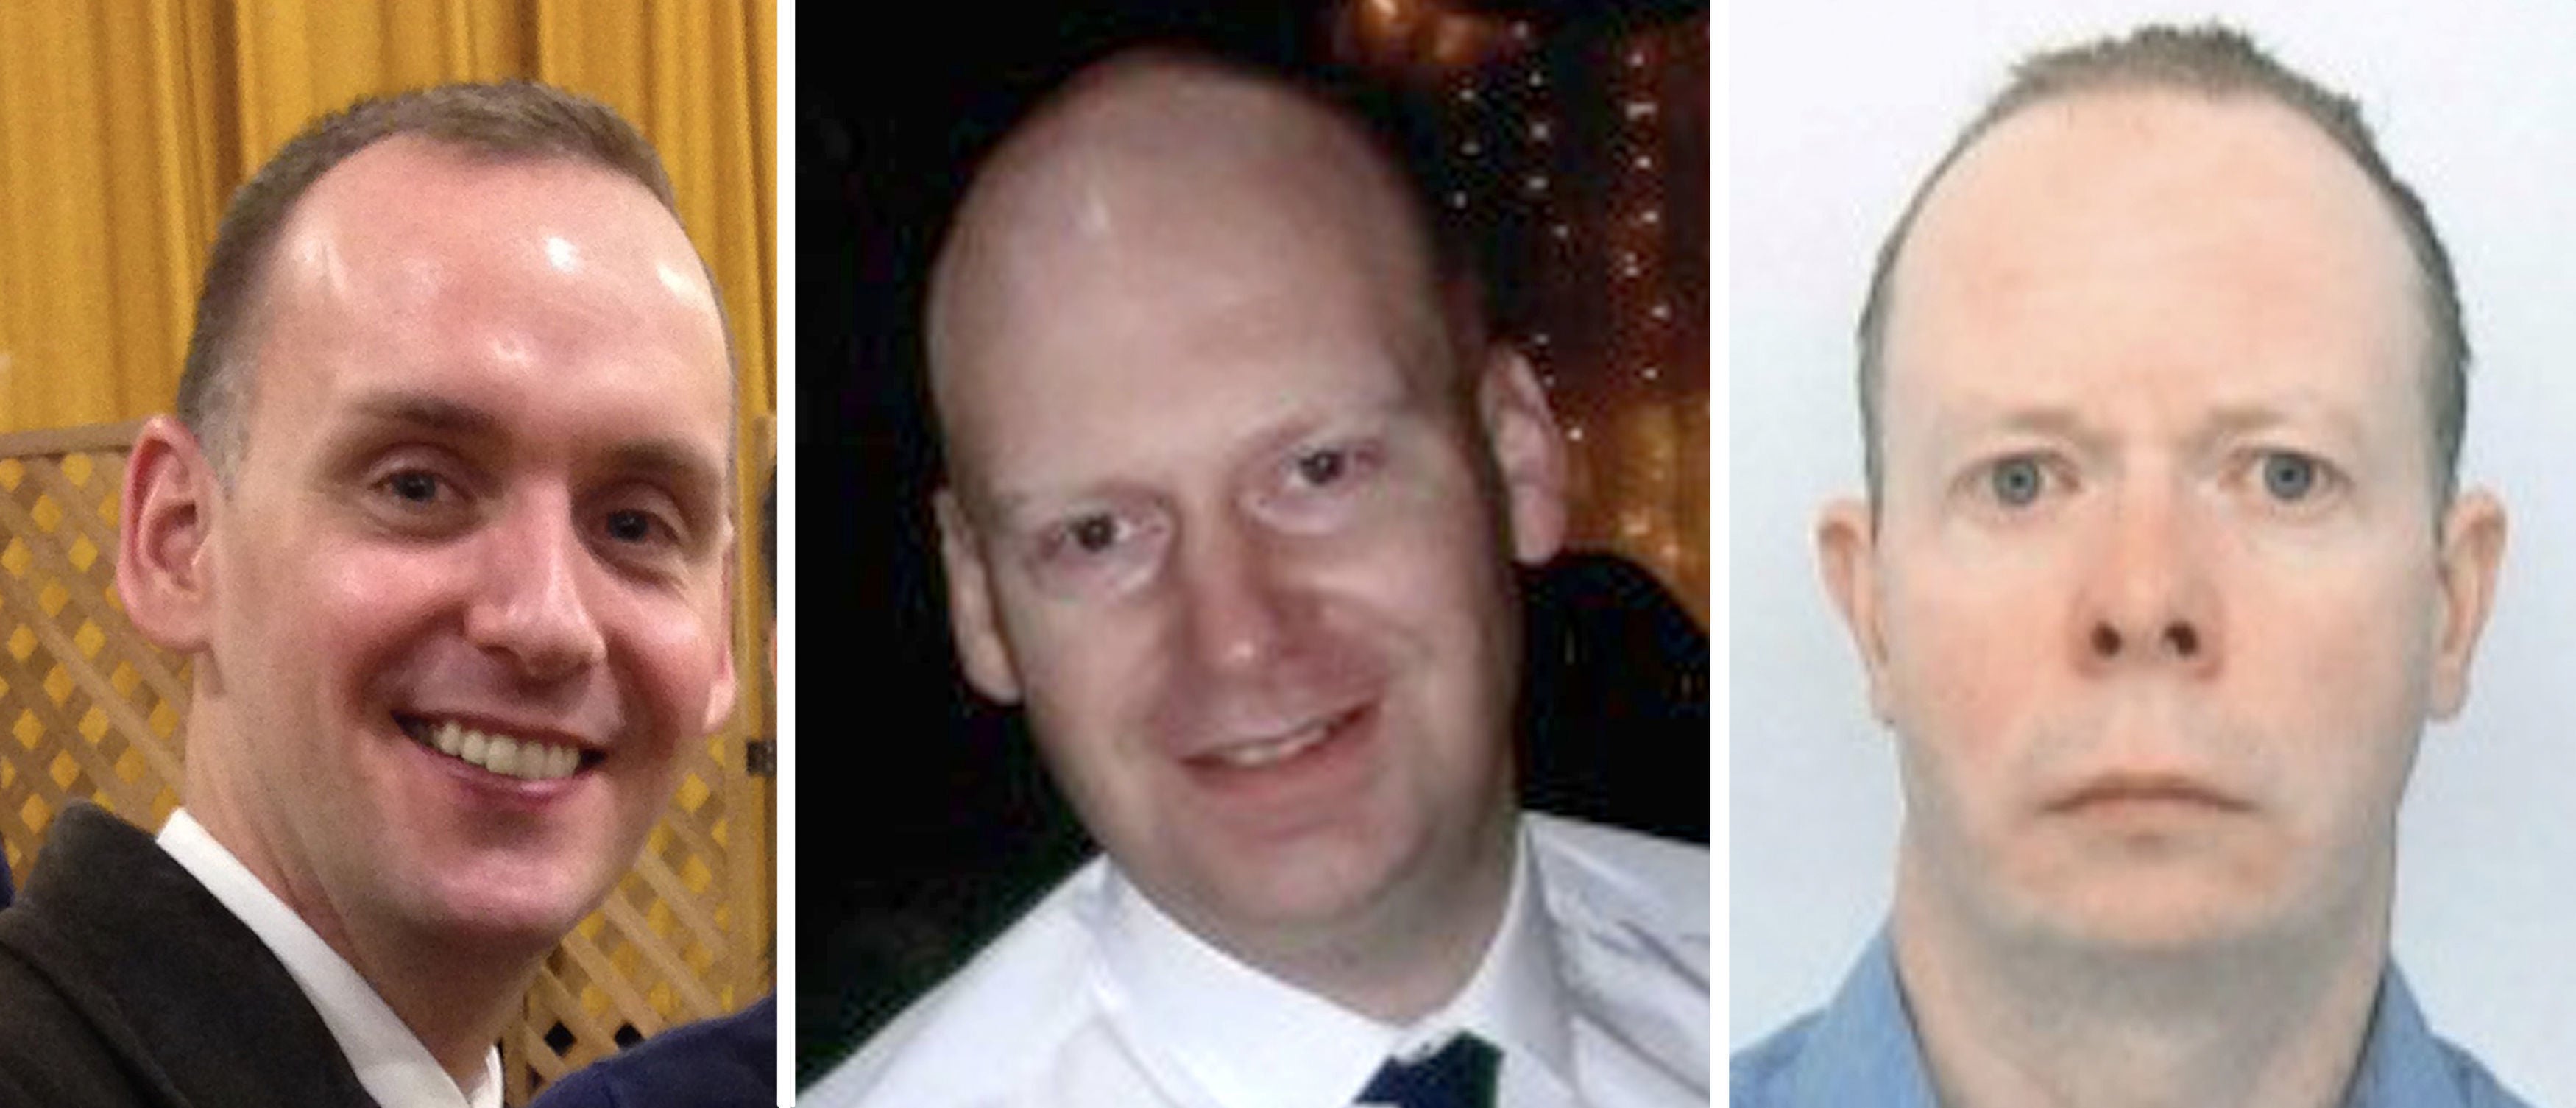 Joseph Ritchie-Bennett, James Furlong and David Wails, the three victims of the Reading attack